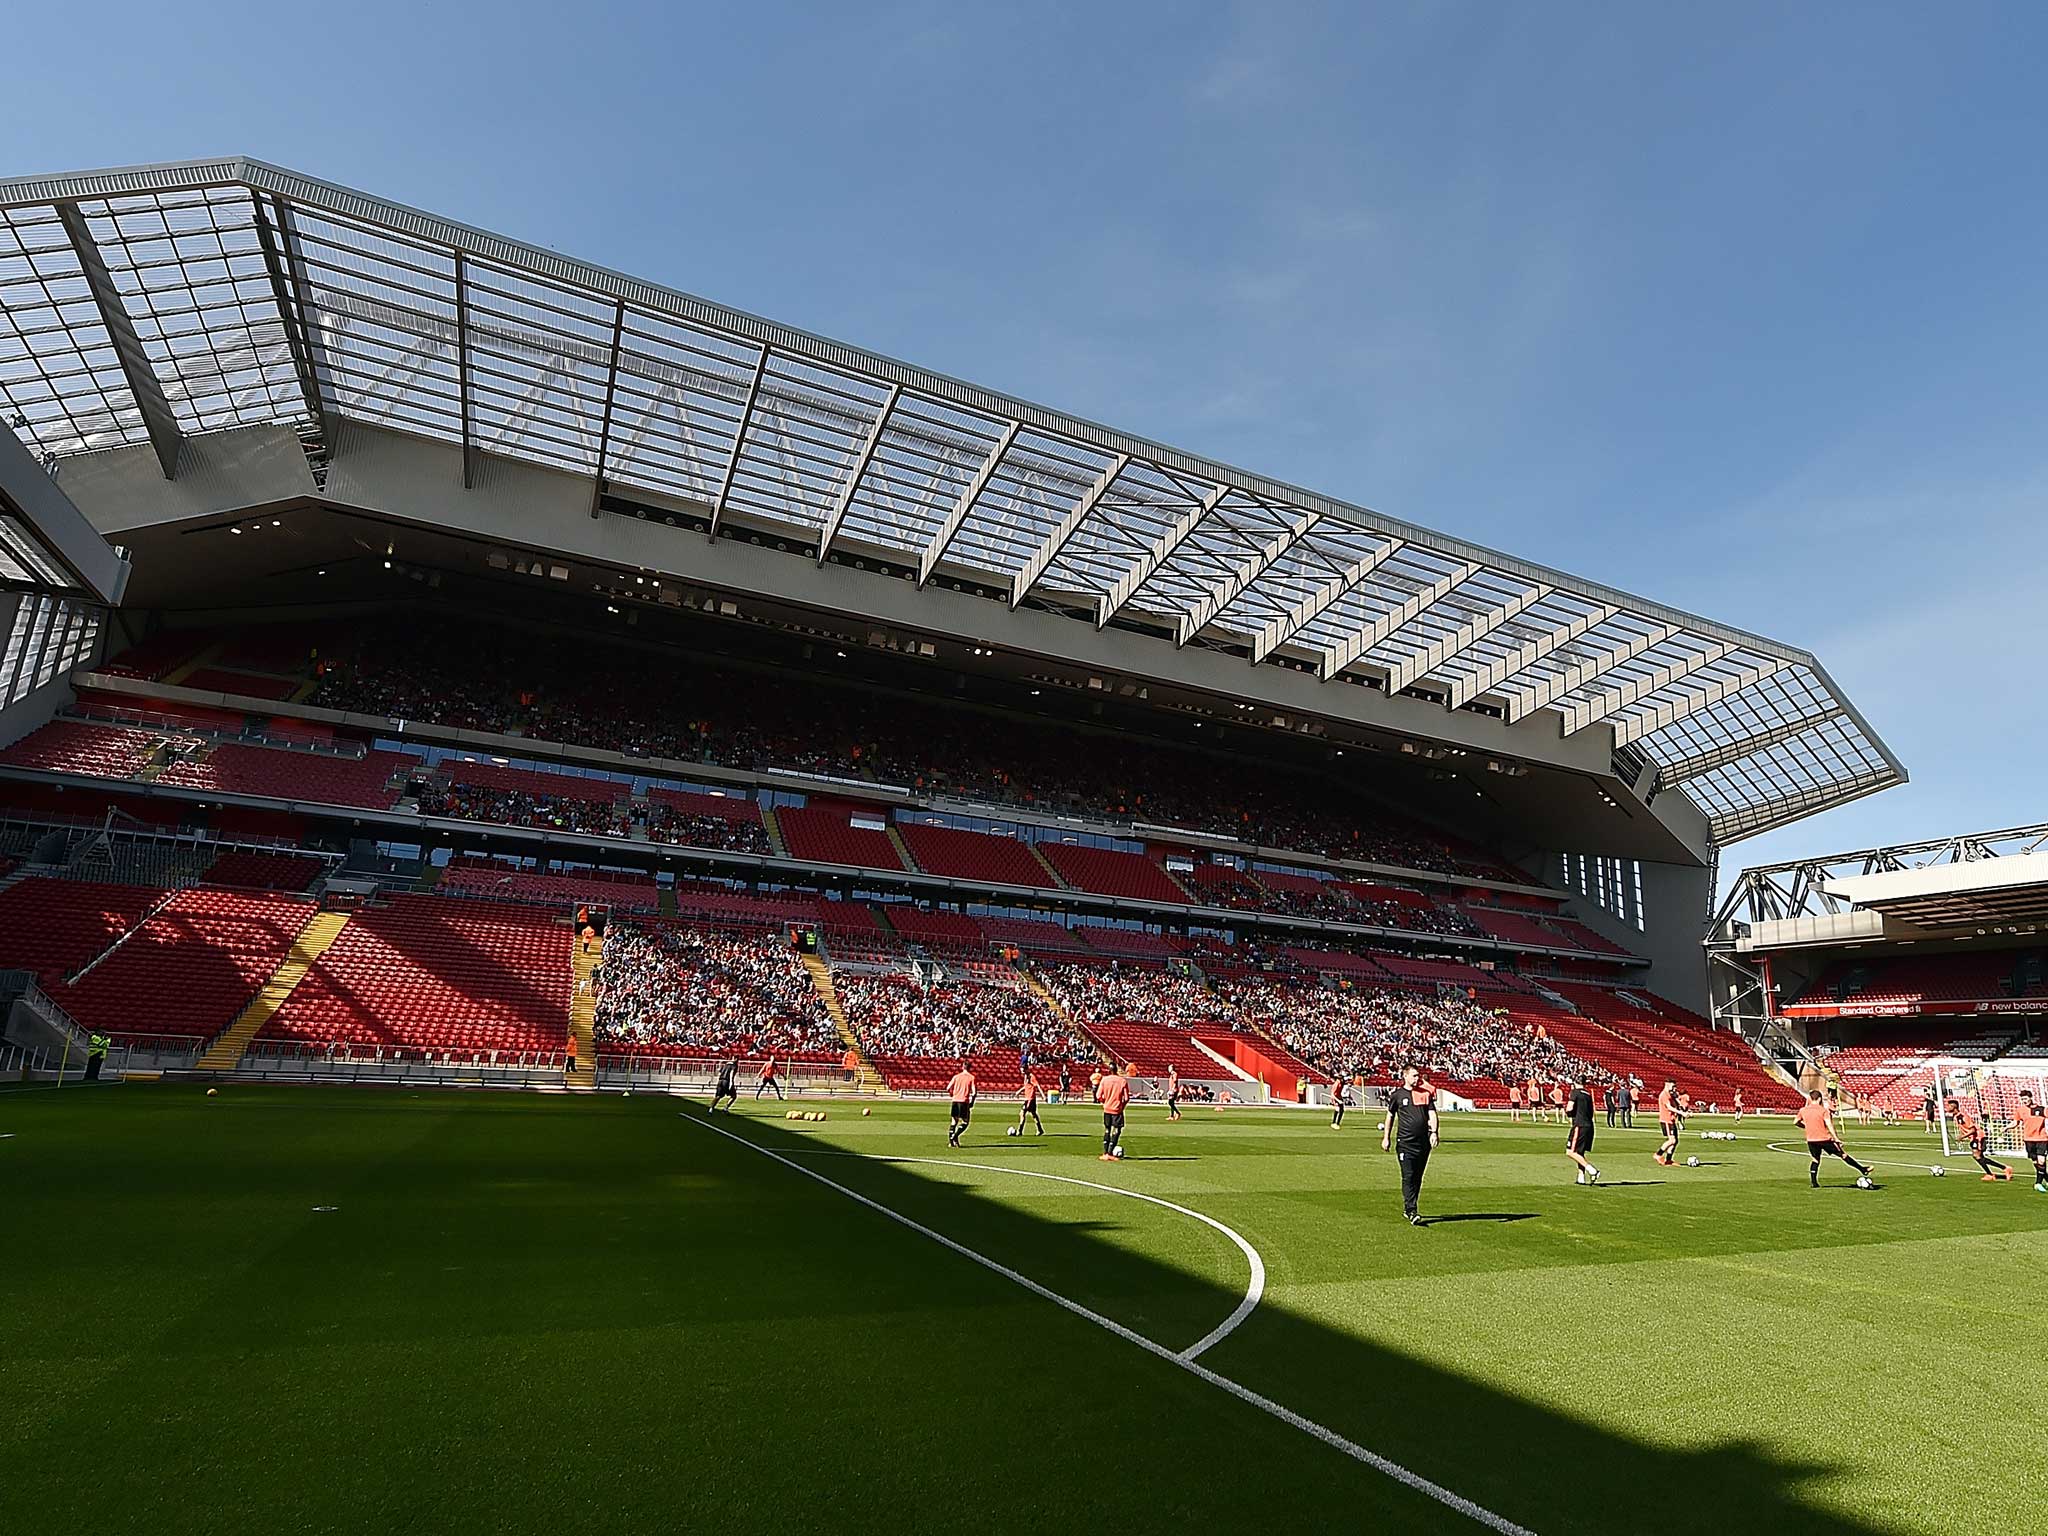 Anfield capacity will now be enlarged to 54,000